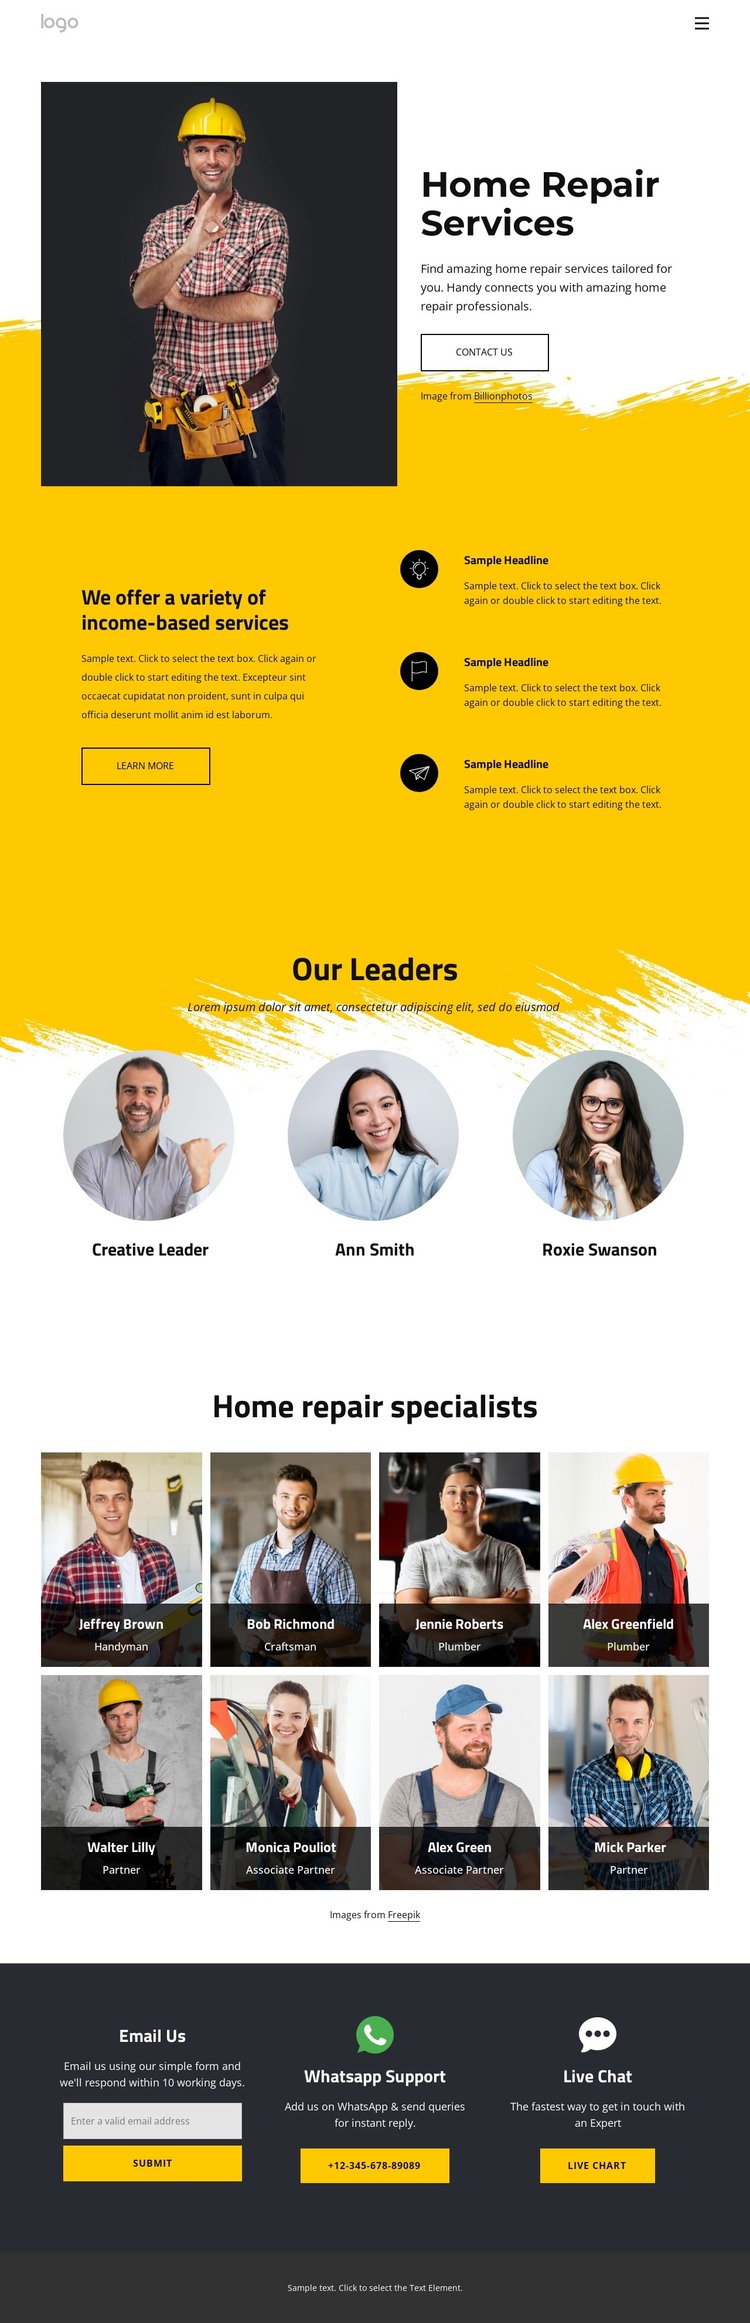 Find home repair services today Web Design